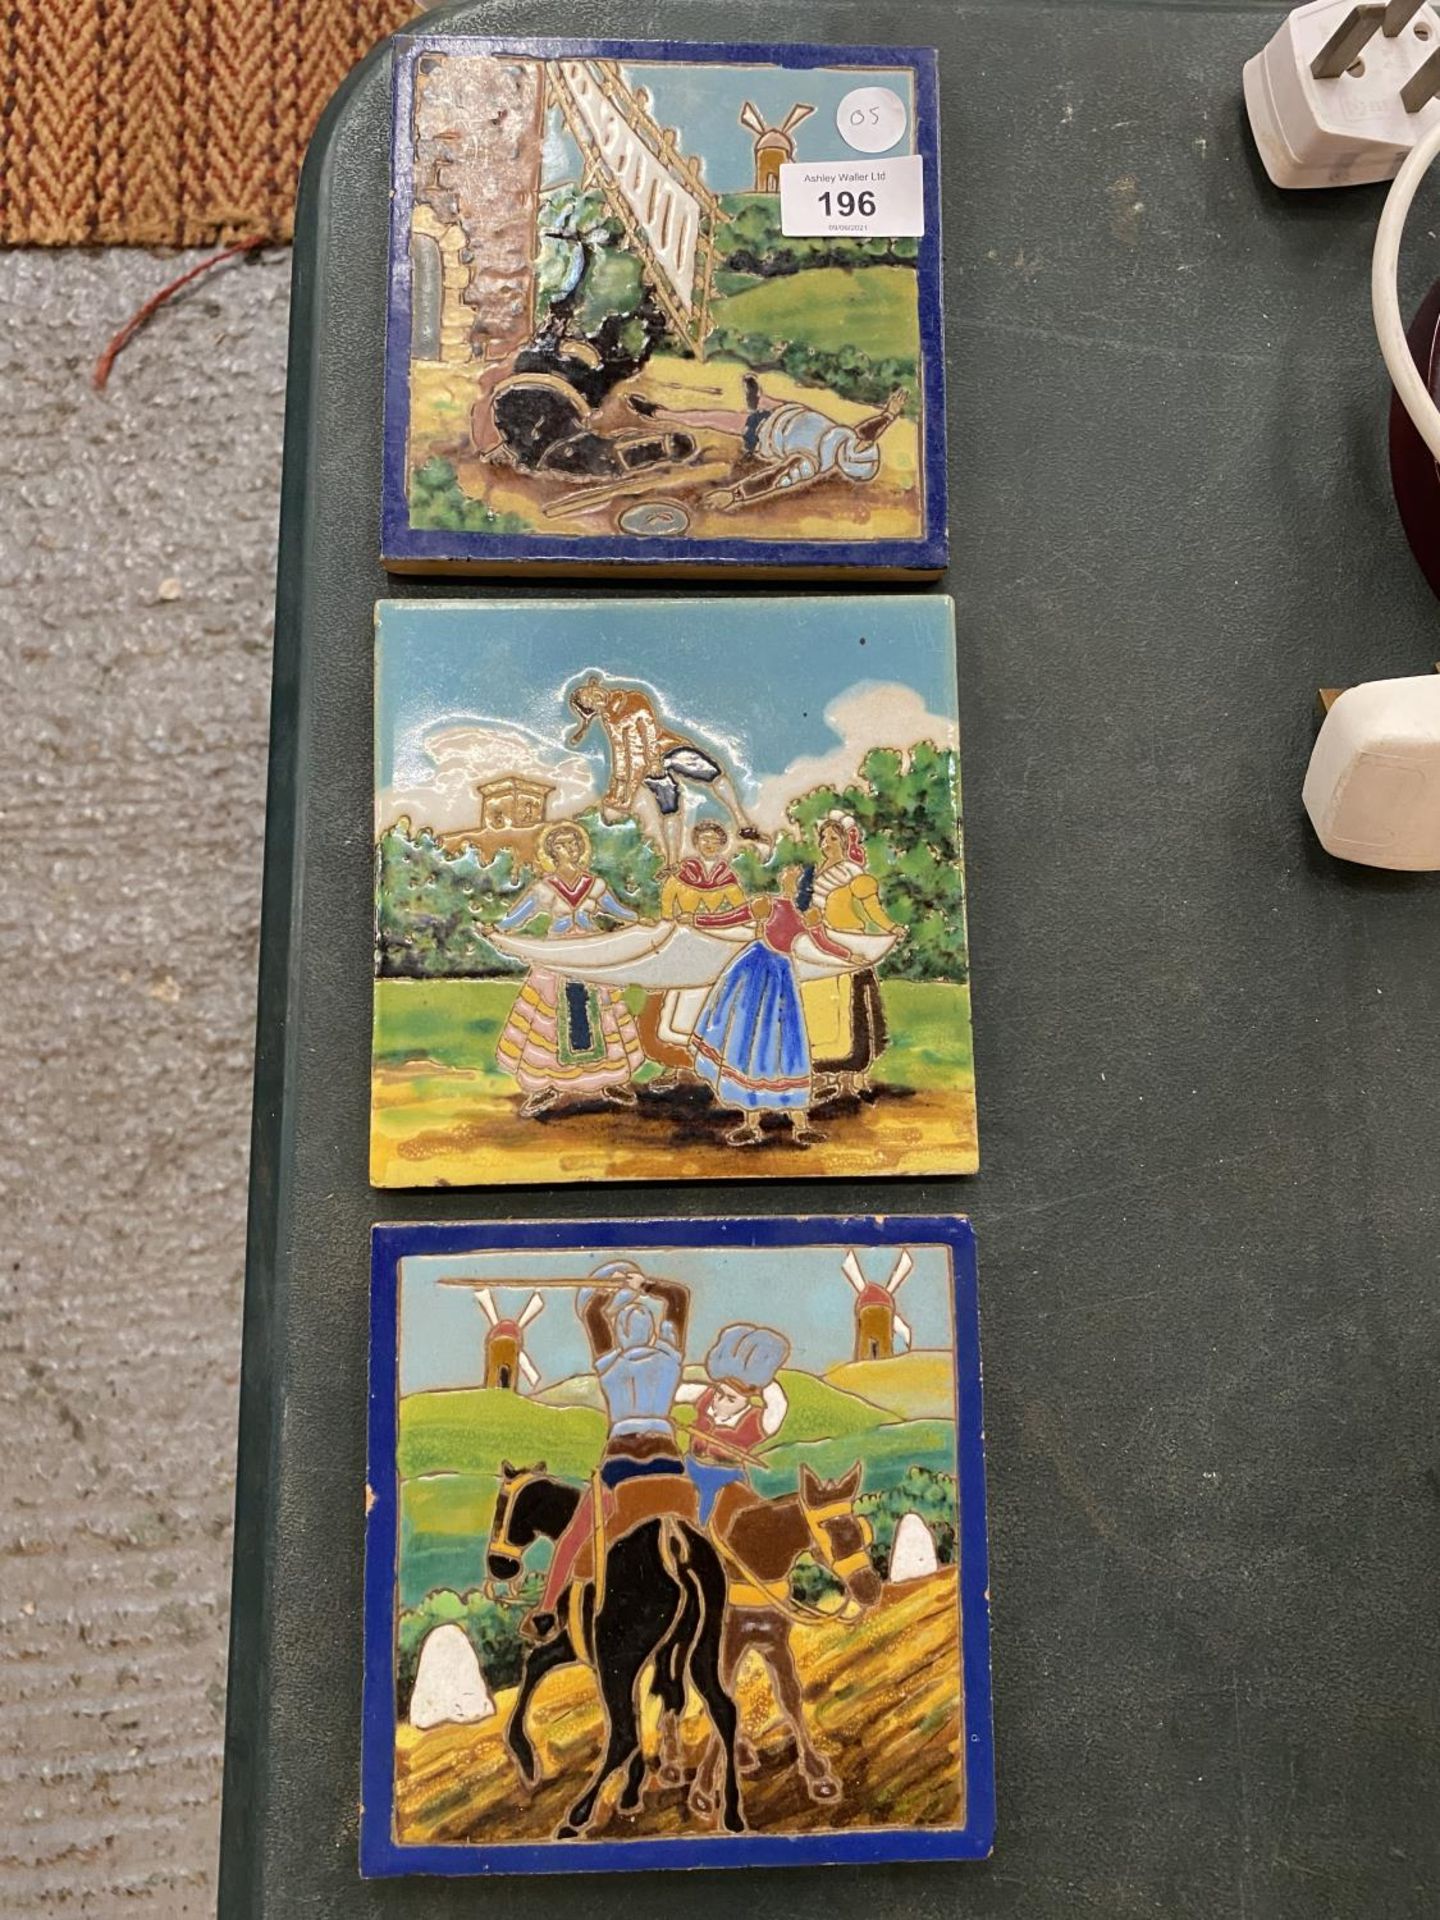 THREE VINTAGE DON QUIXOTE TILES FROM SEVILLE